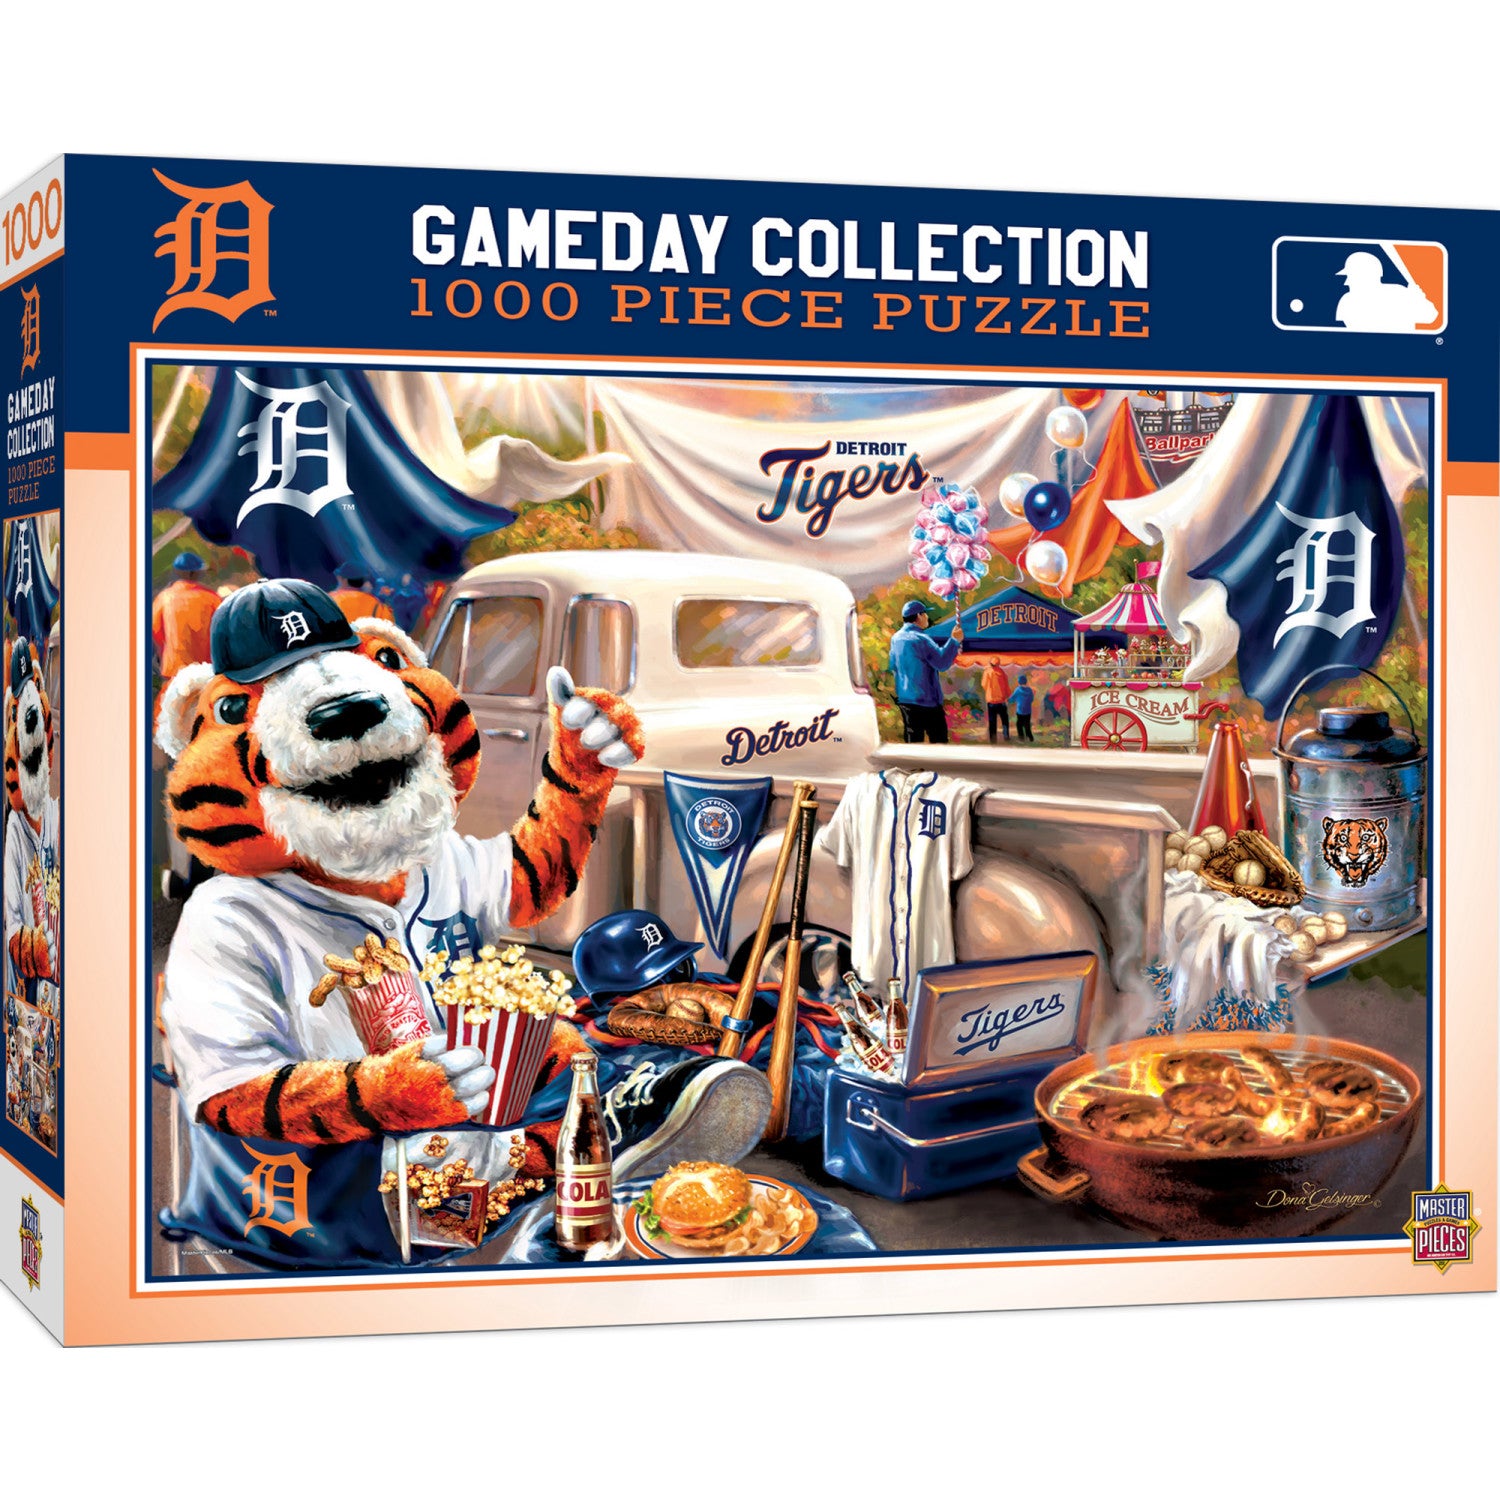 Detroit Tigers - Gameday 1000 Piece Jigsaw Puzzle